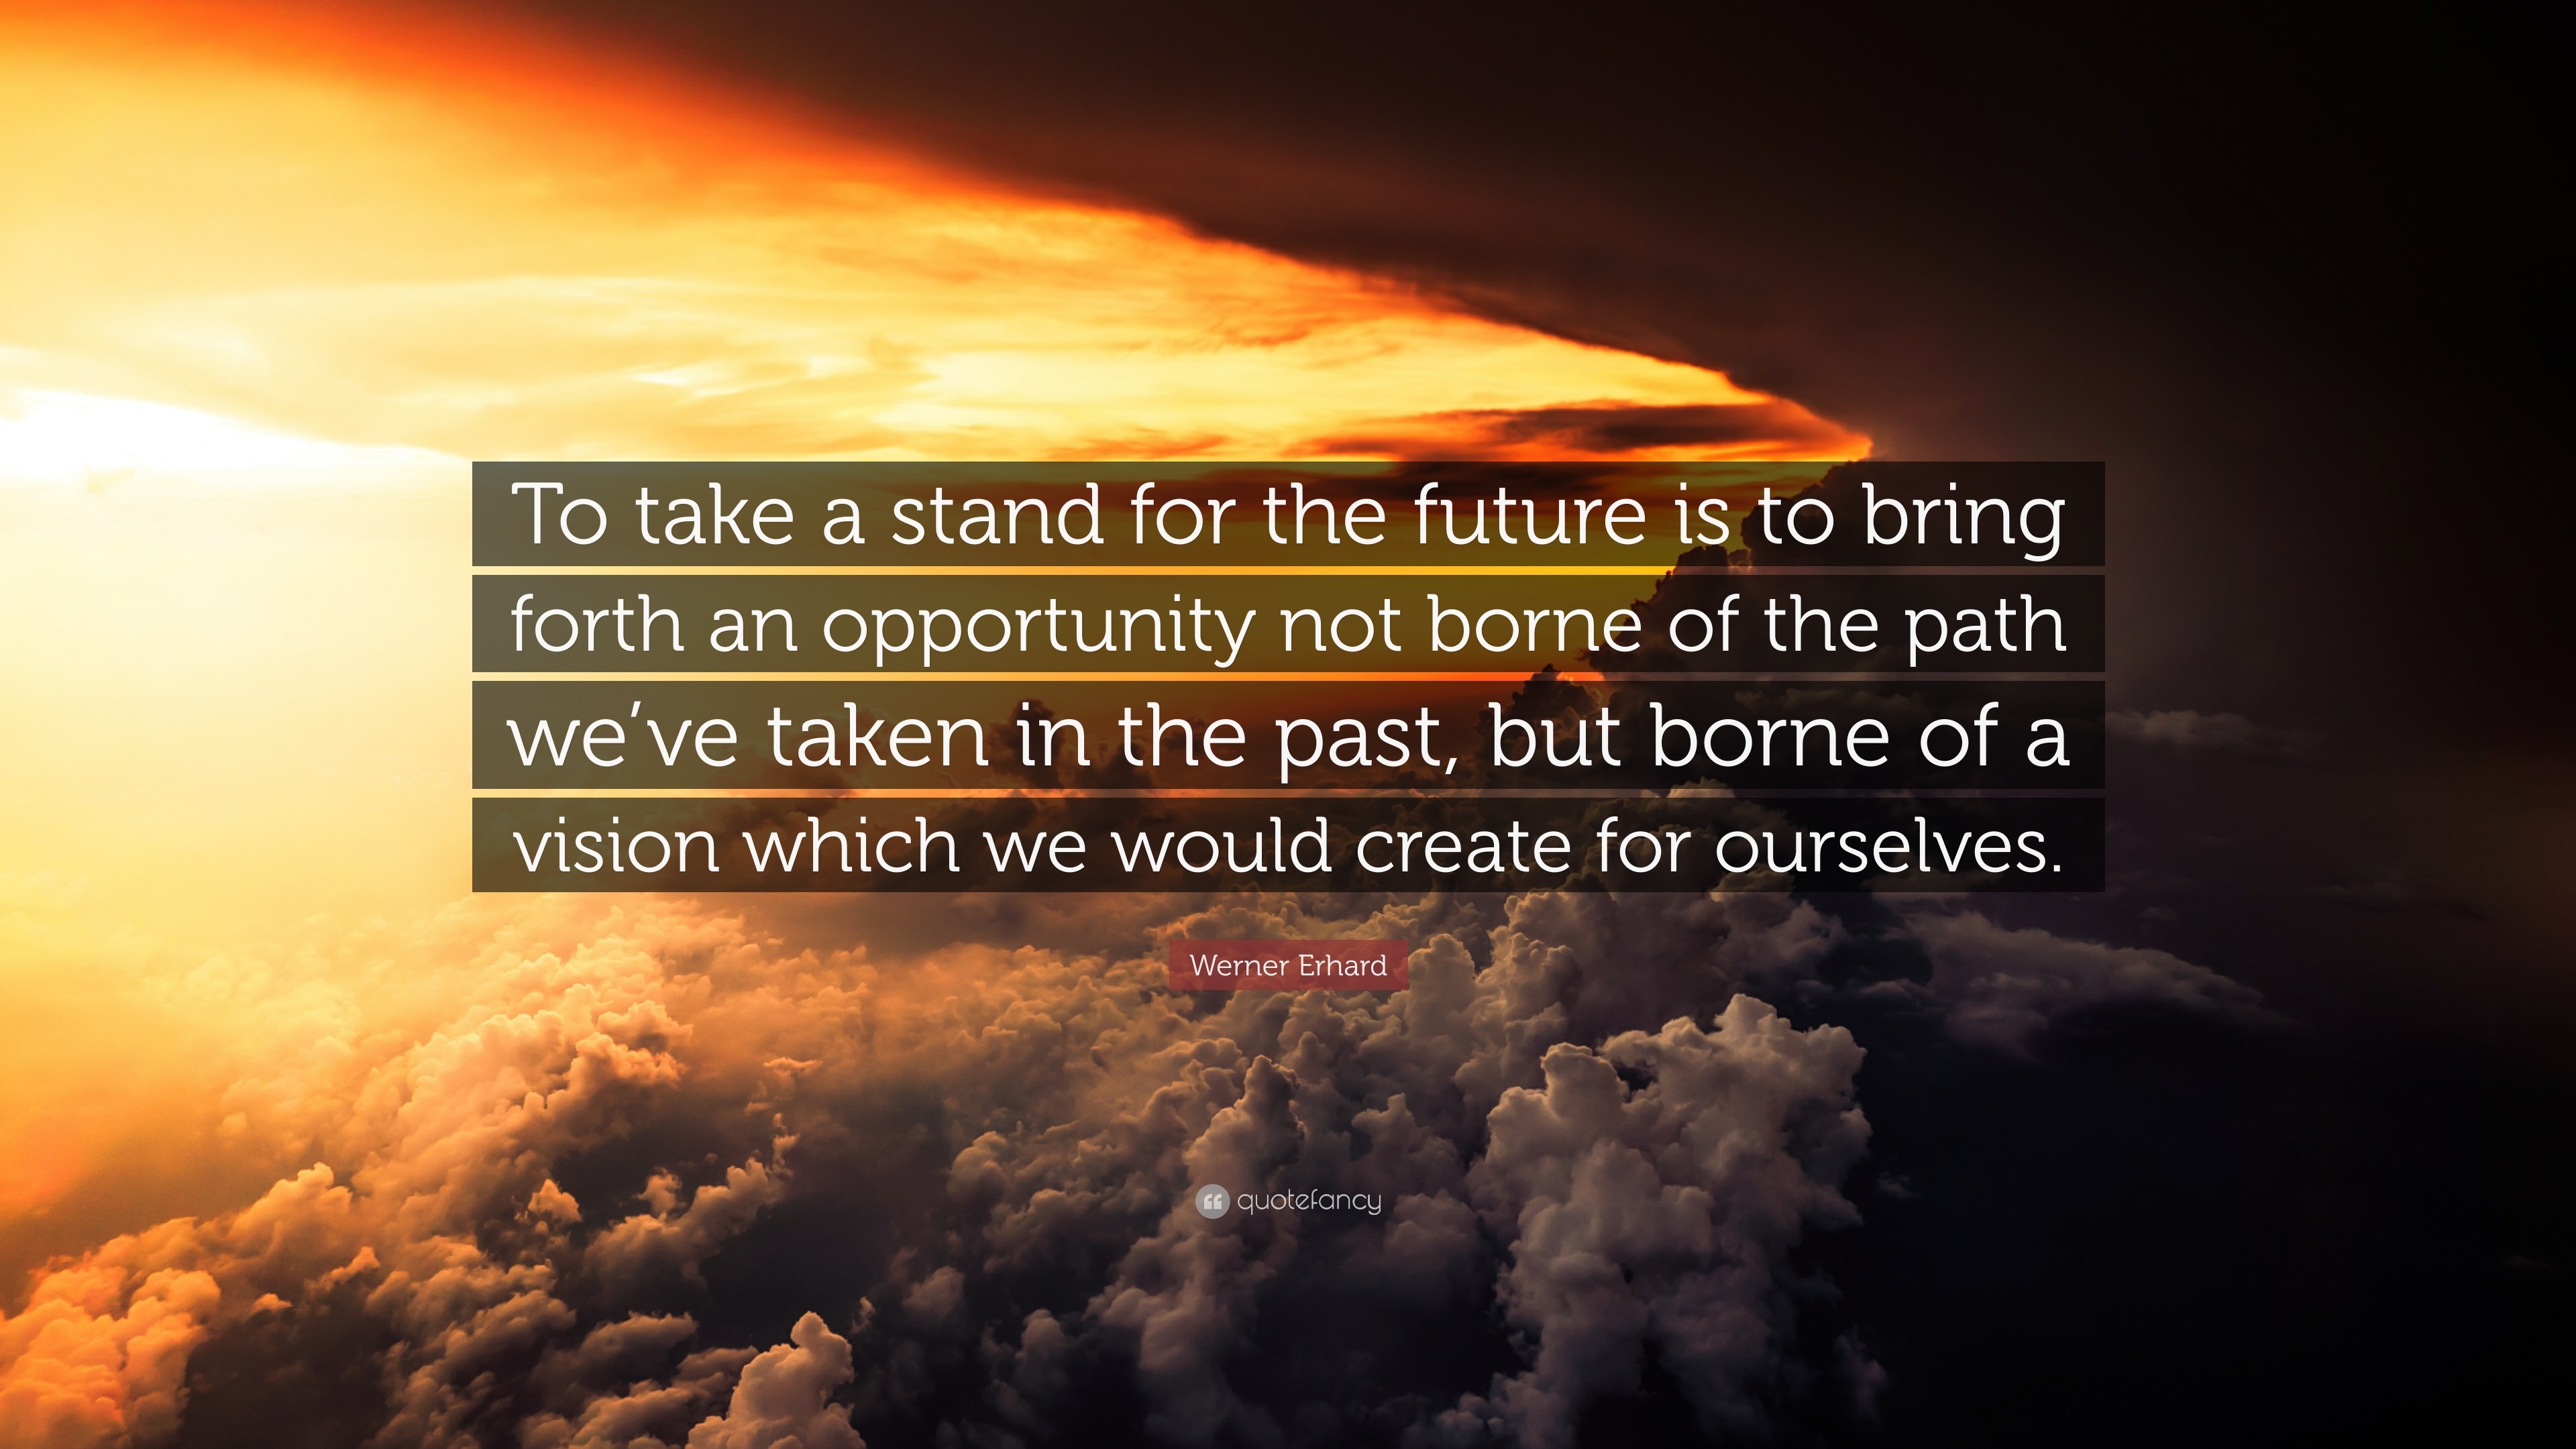 Werner Erhard Quote “to Take A Stand For The Future Is To Bring Forth